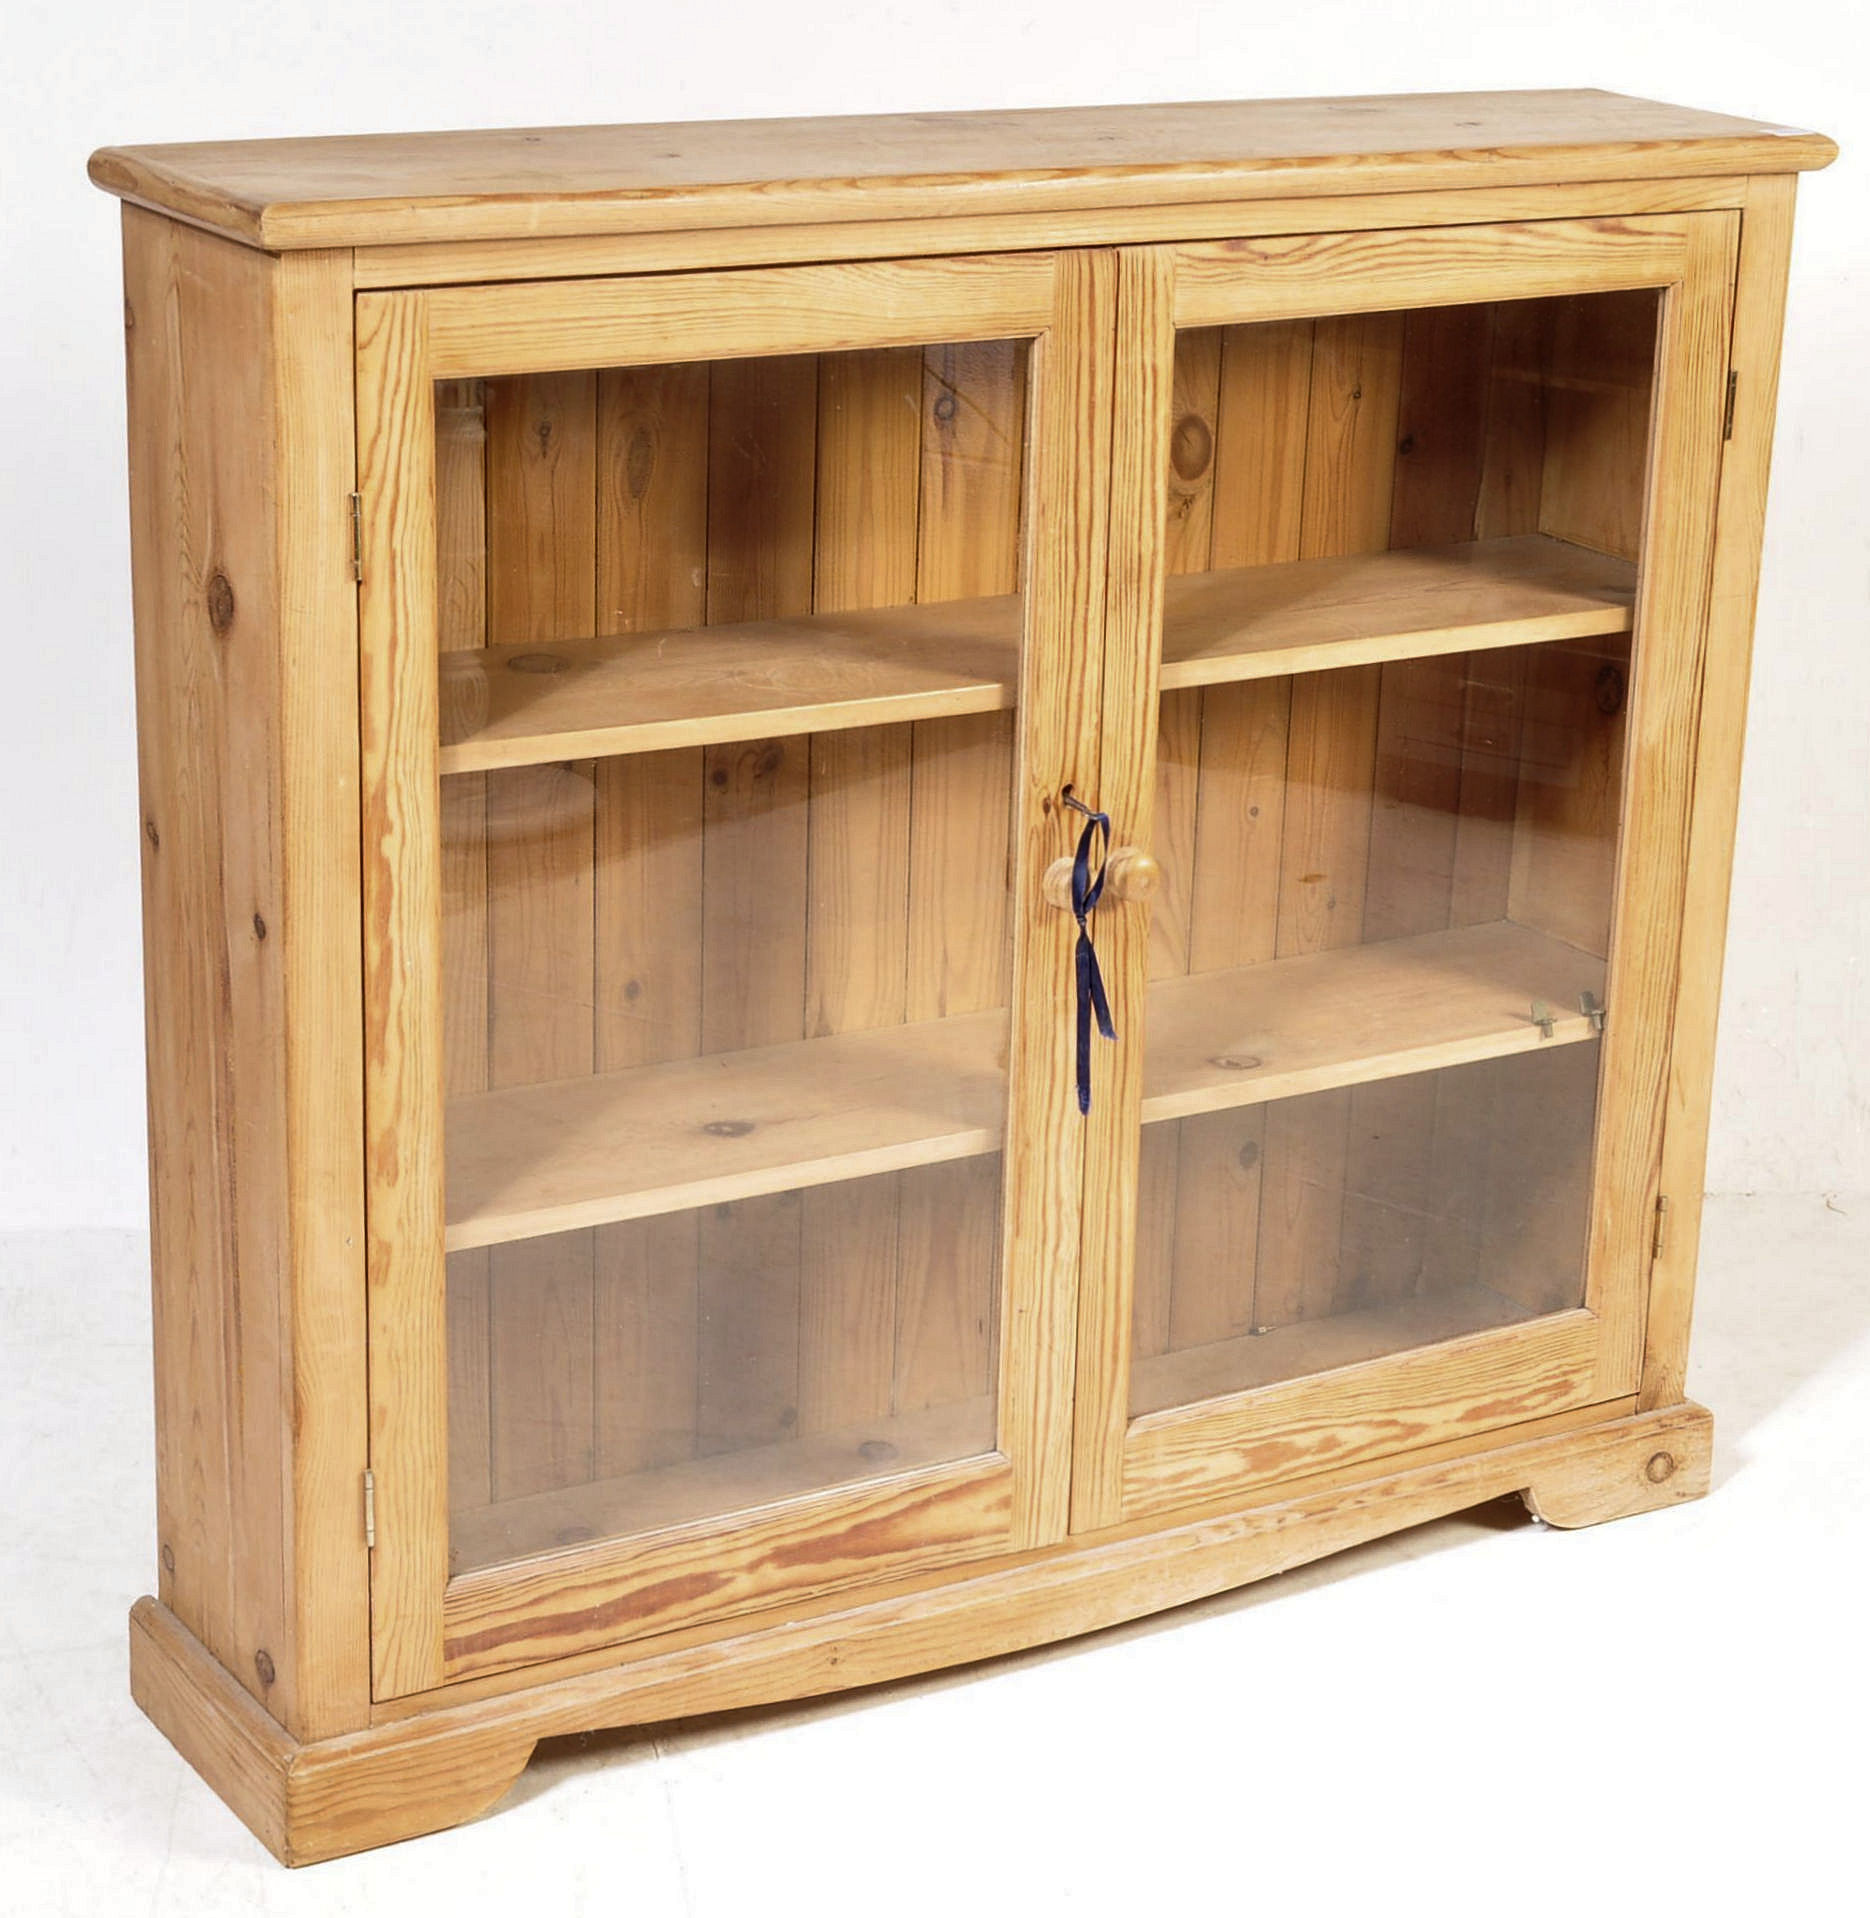 A VICTORIAN STYLE PINE LIBRARY BOOKCASE DISPLAY CABINET - Image 2 of 7